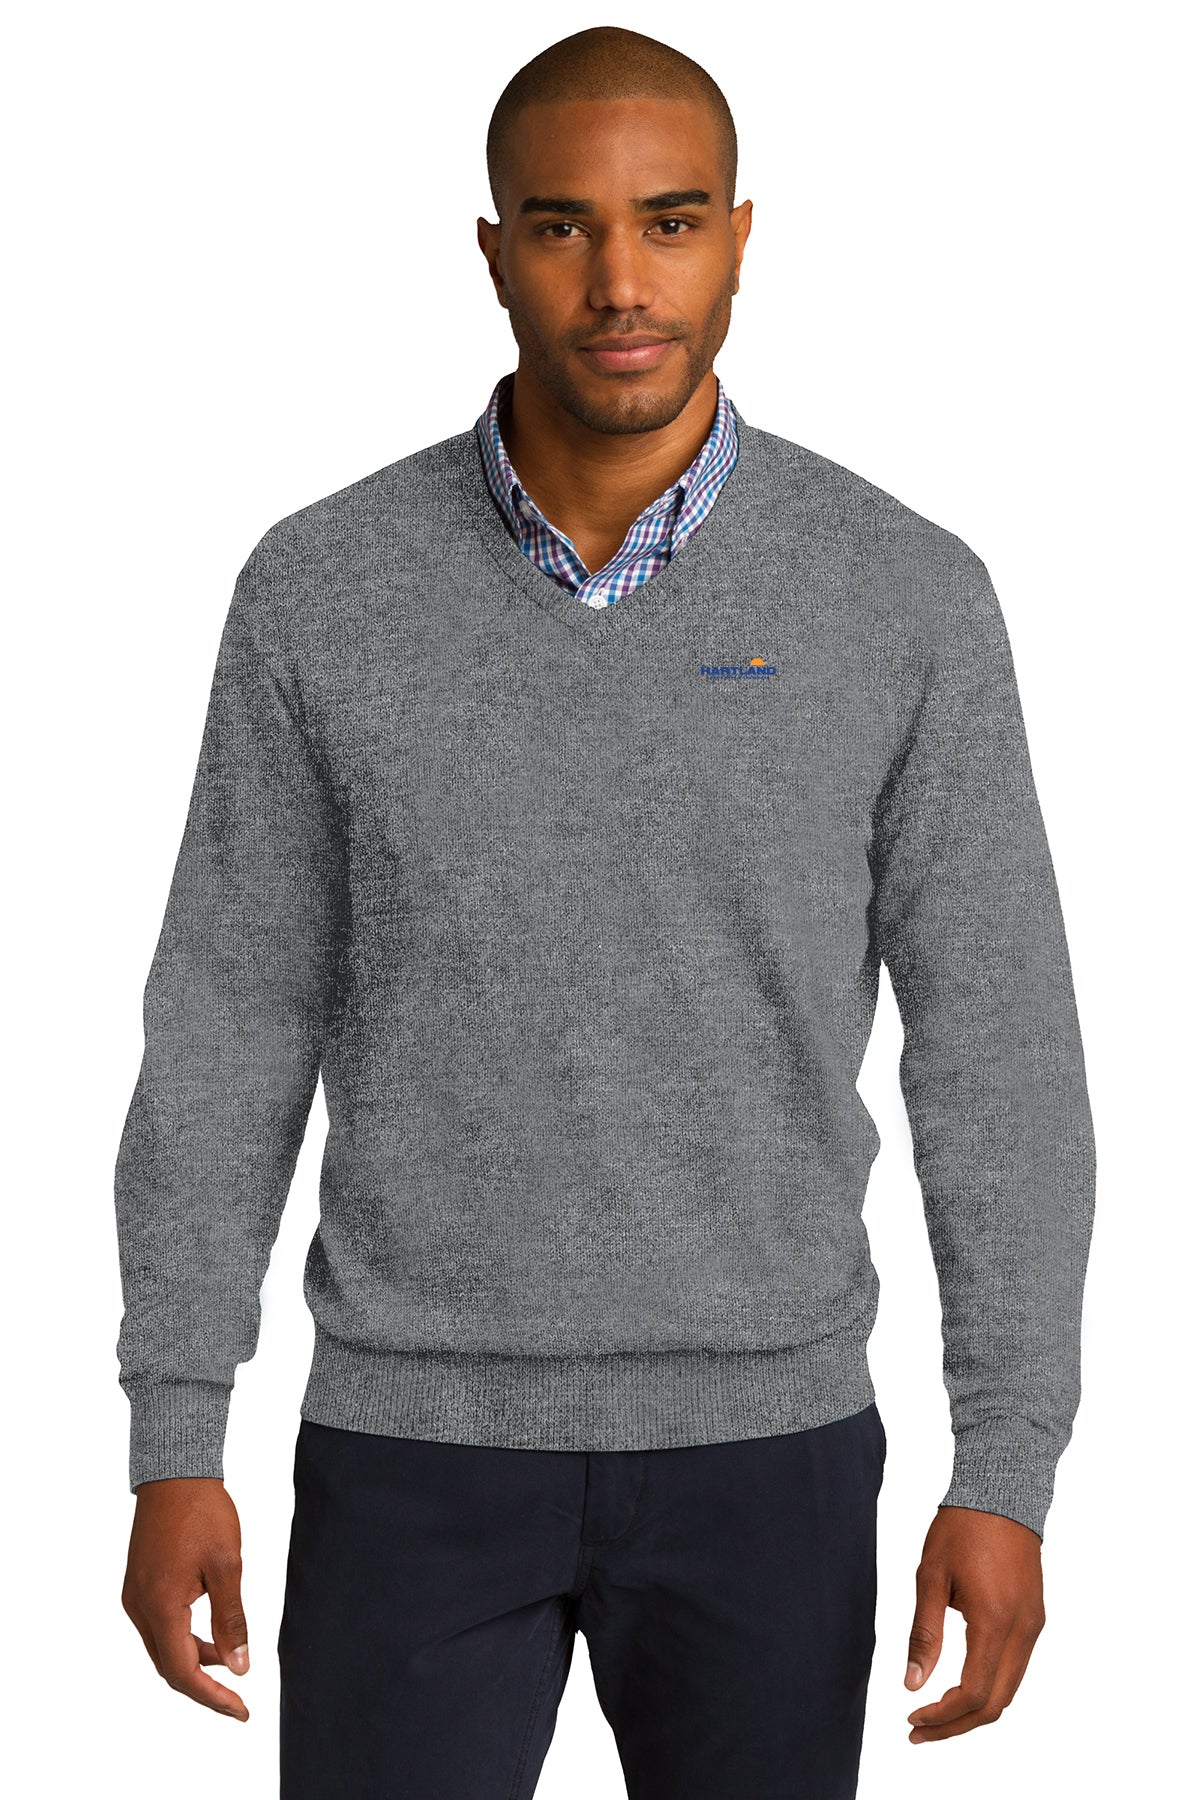 Hartland Lubricants and Chemicals V-Neck Sweater